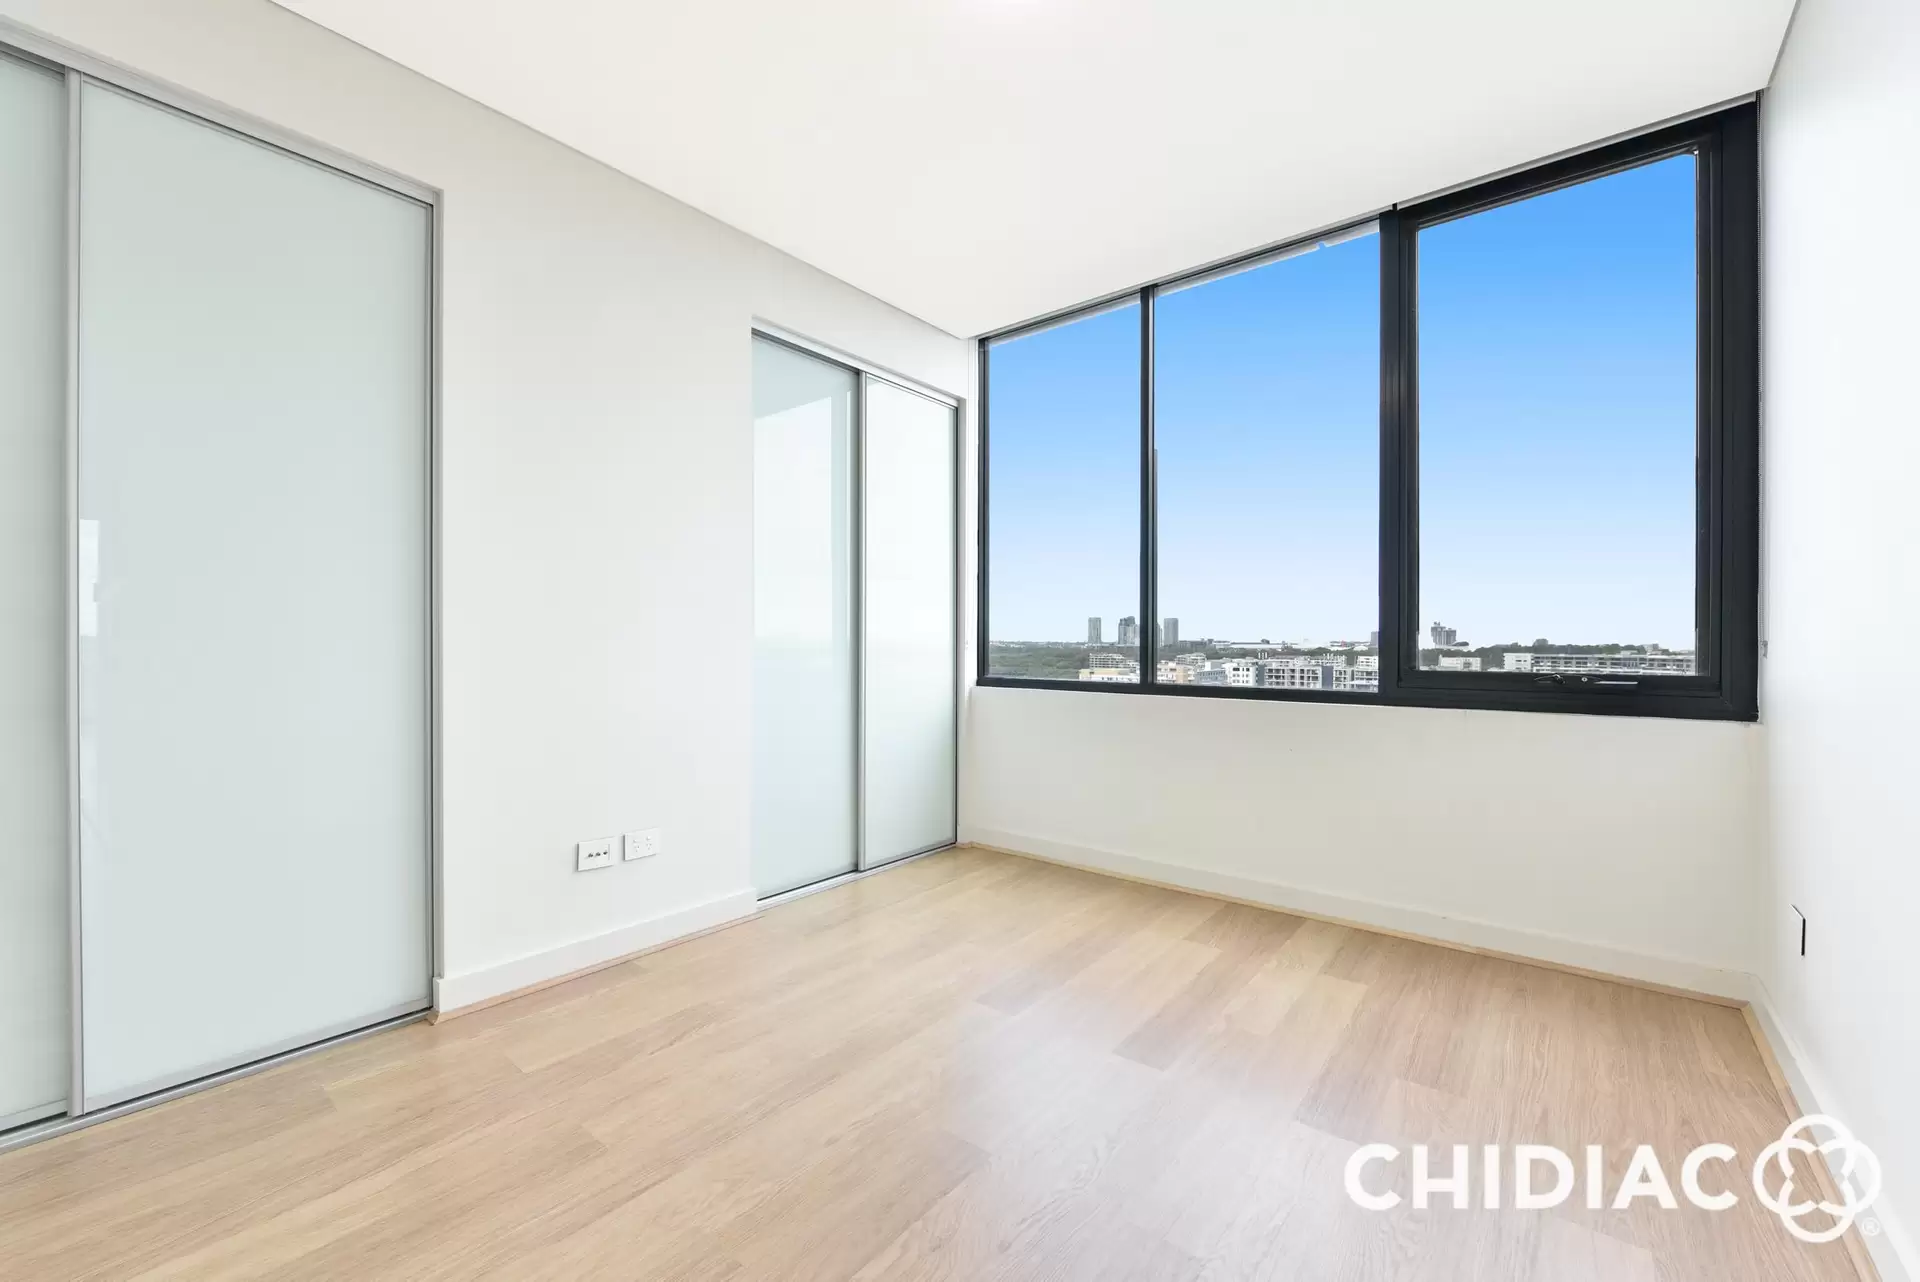 1202/46 Savona Drive, Wentworth Point Leased by Chidiac Realty - image 1